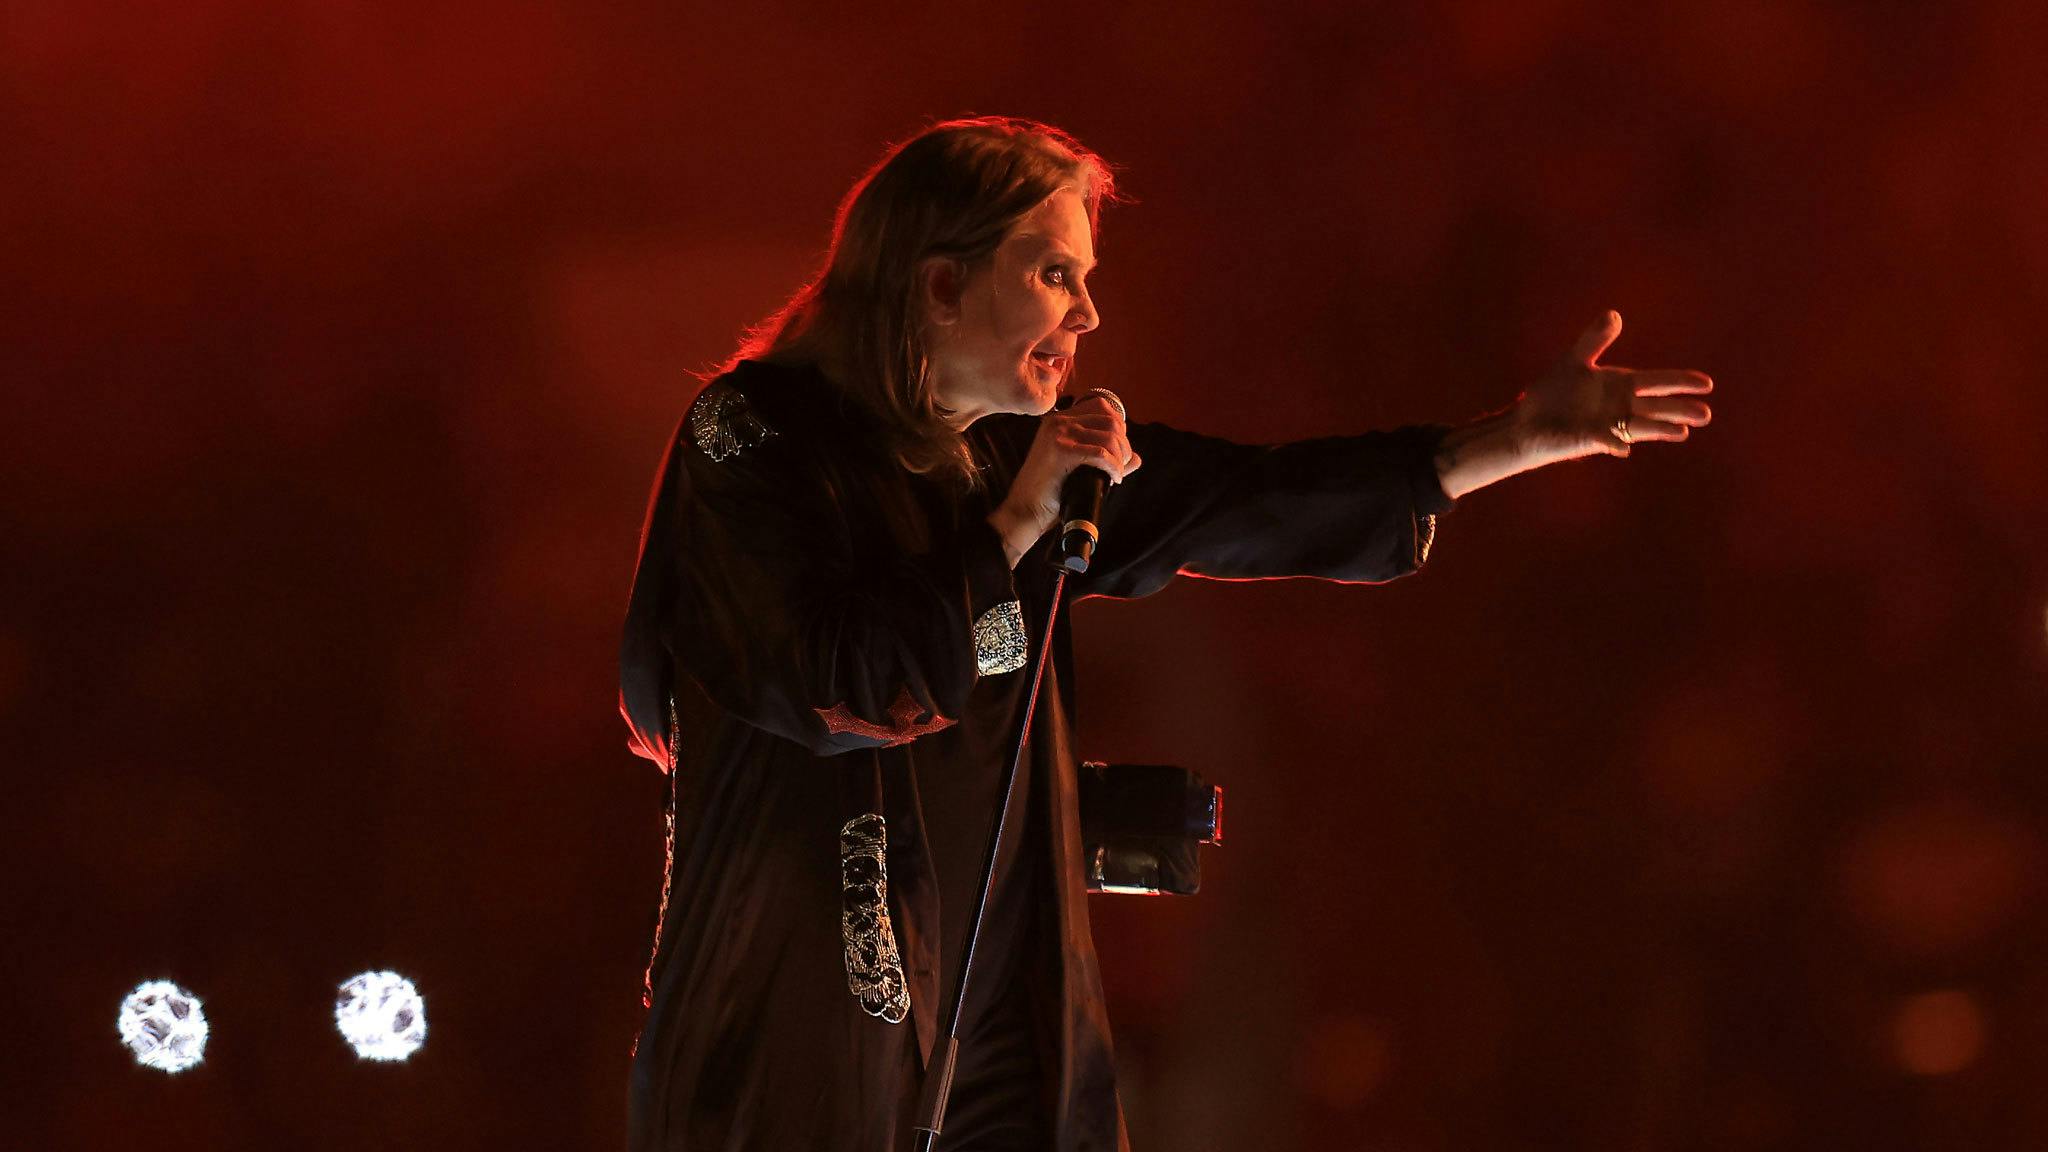 Ozzy Osbourne and Tony Iommi close Commonwealth Games with Sabbath reunion